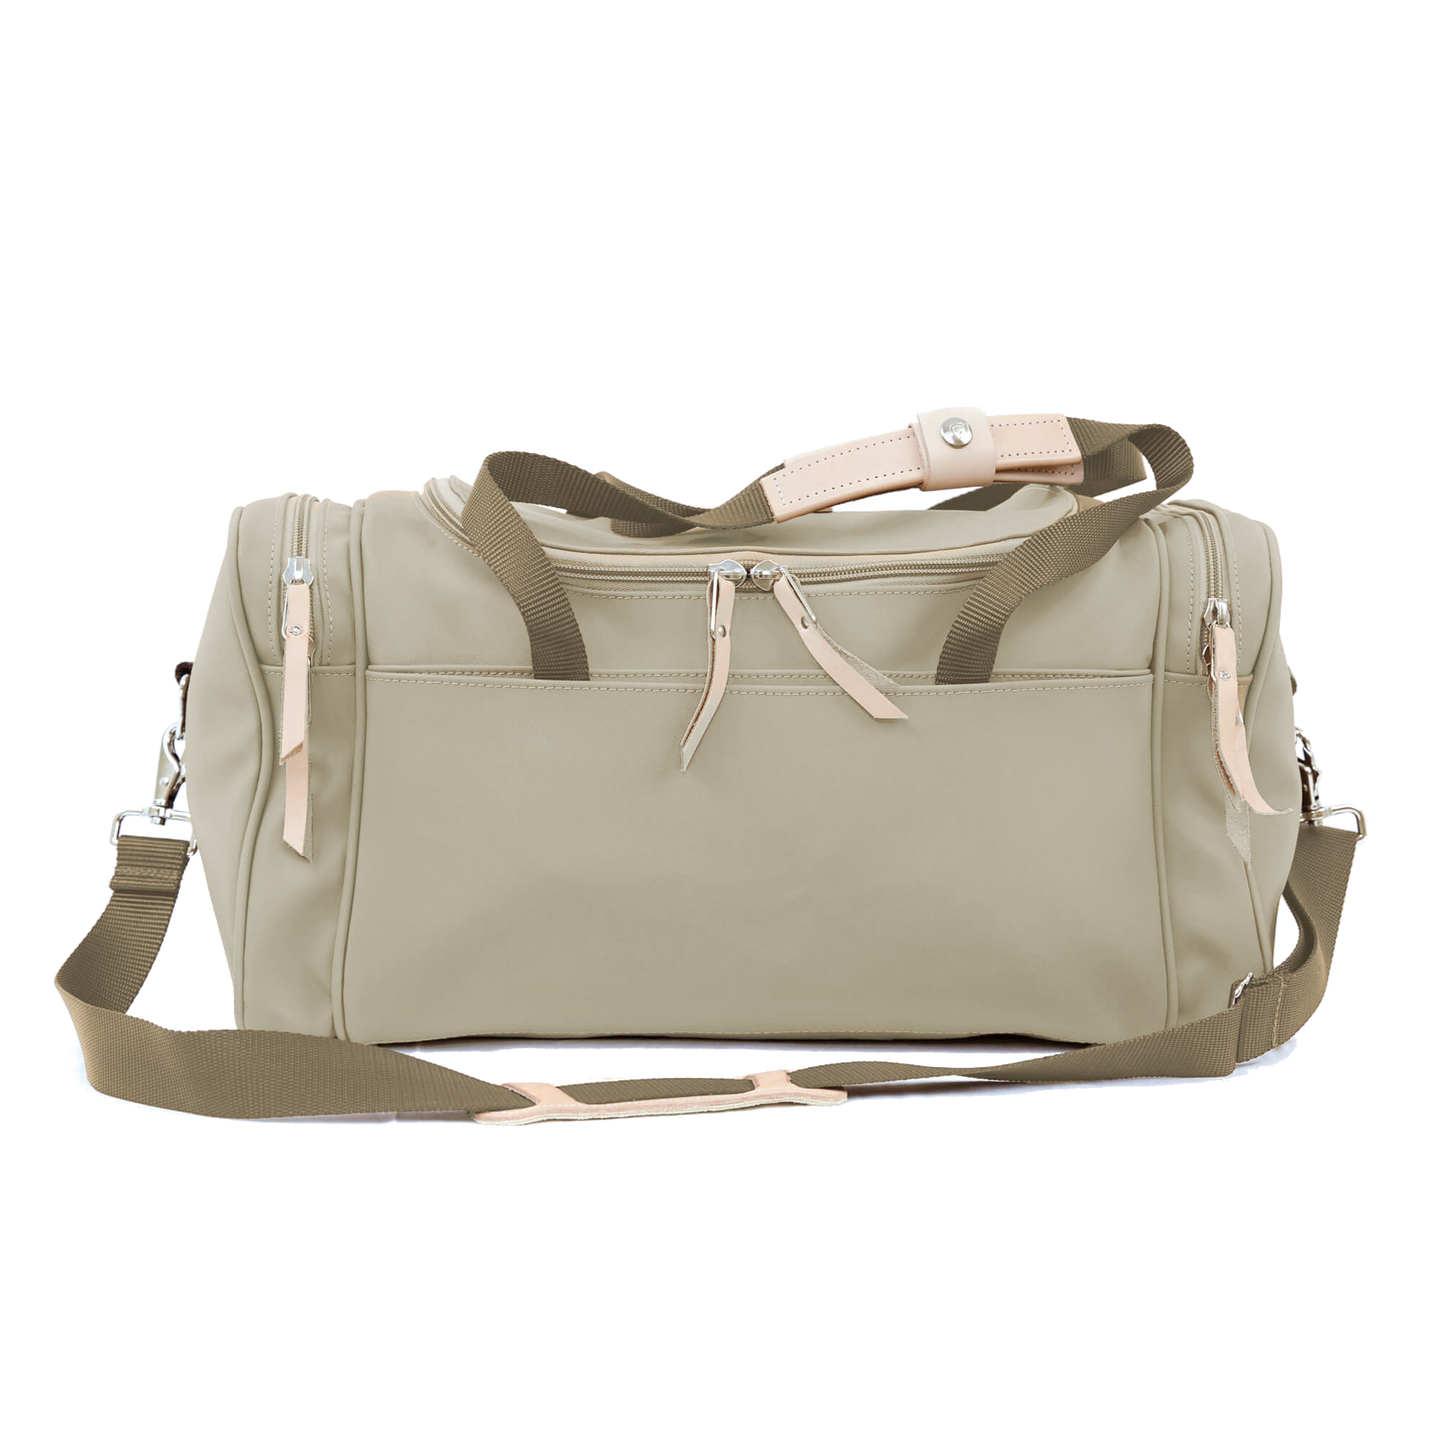 Small Square Duffel - Tan Coated Canvas Front Angle in Color 'Tan Coated Canvas'